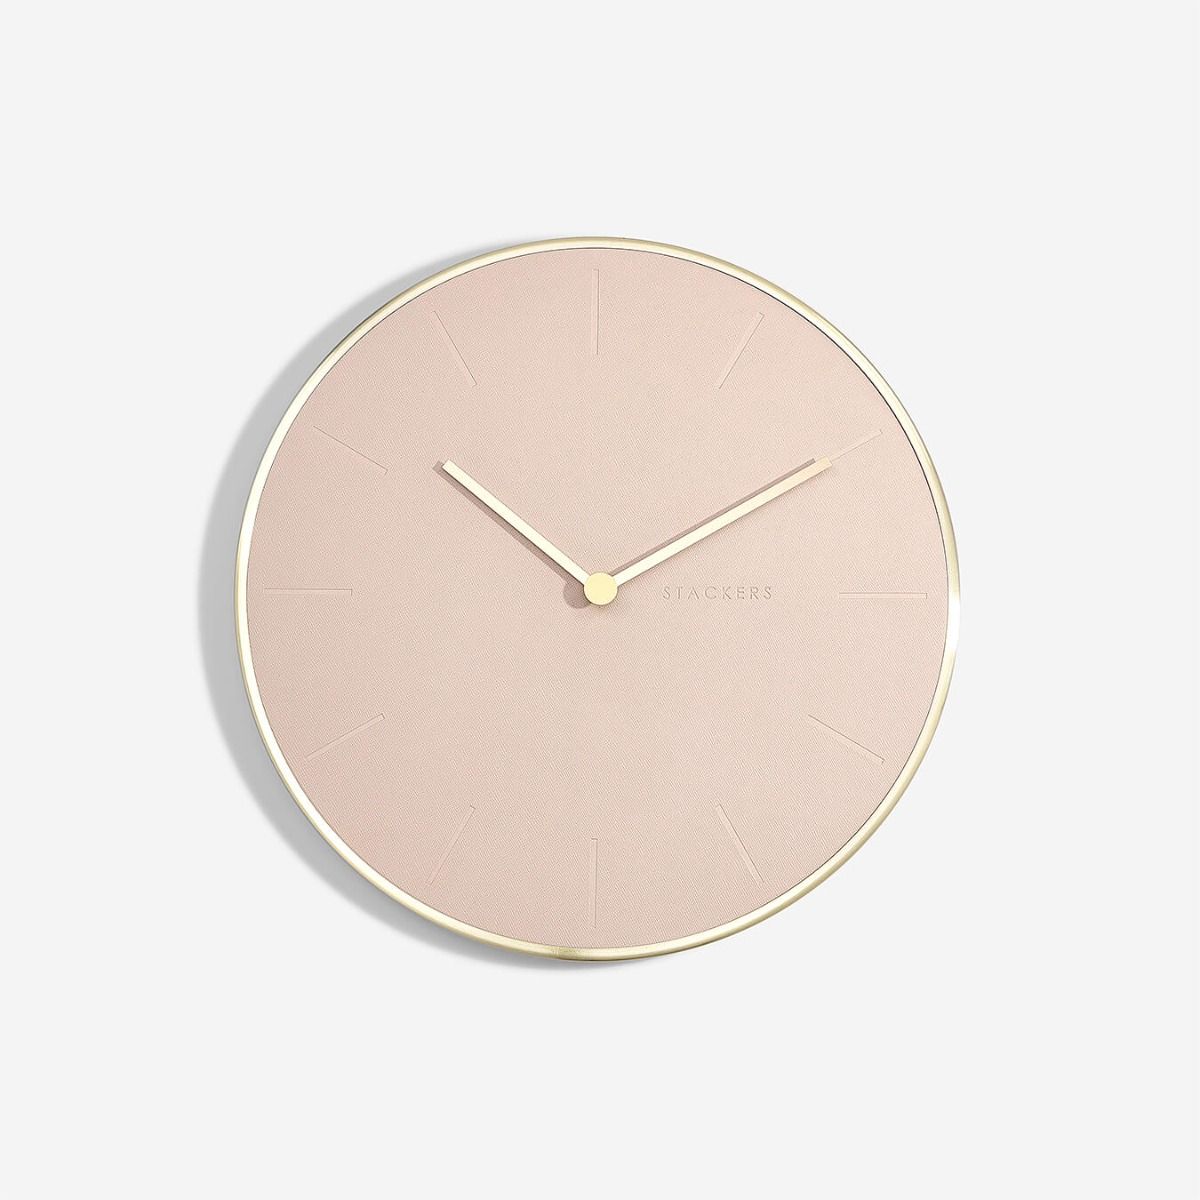 Blush and Brushed Gold Wall Clock